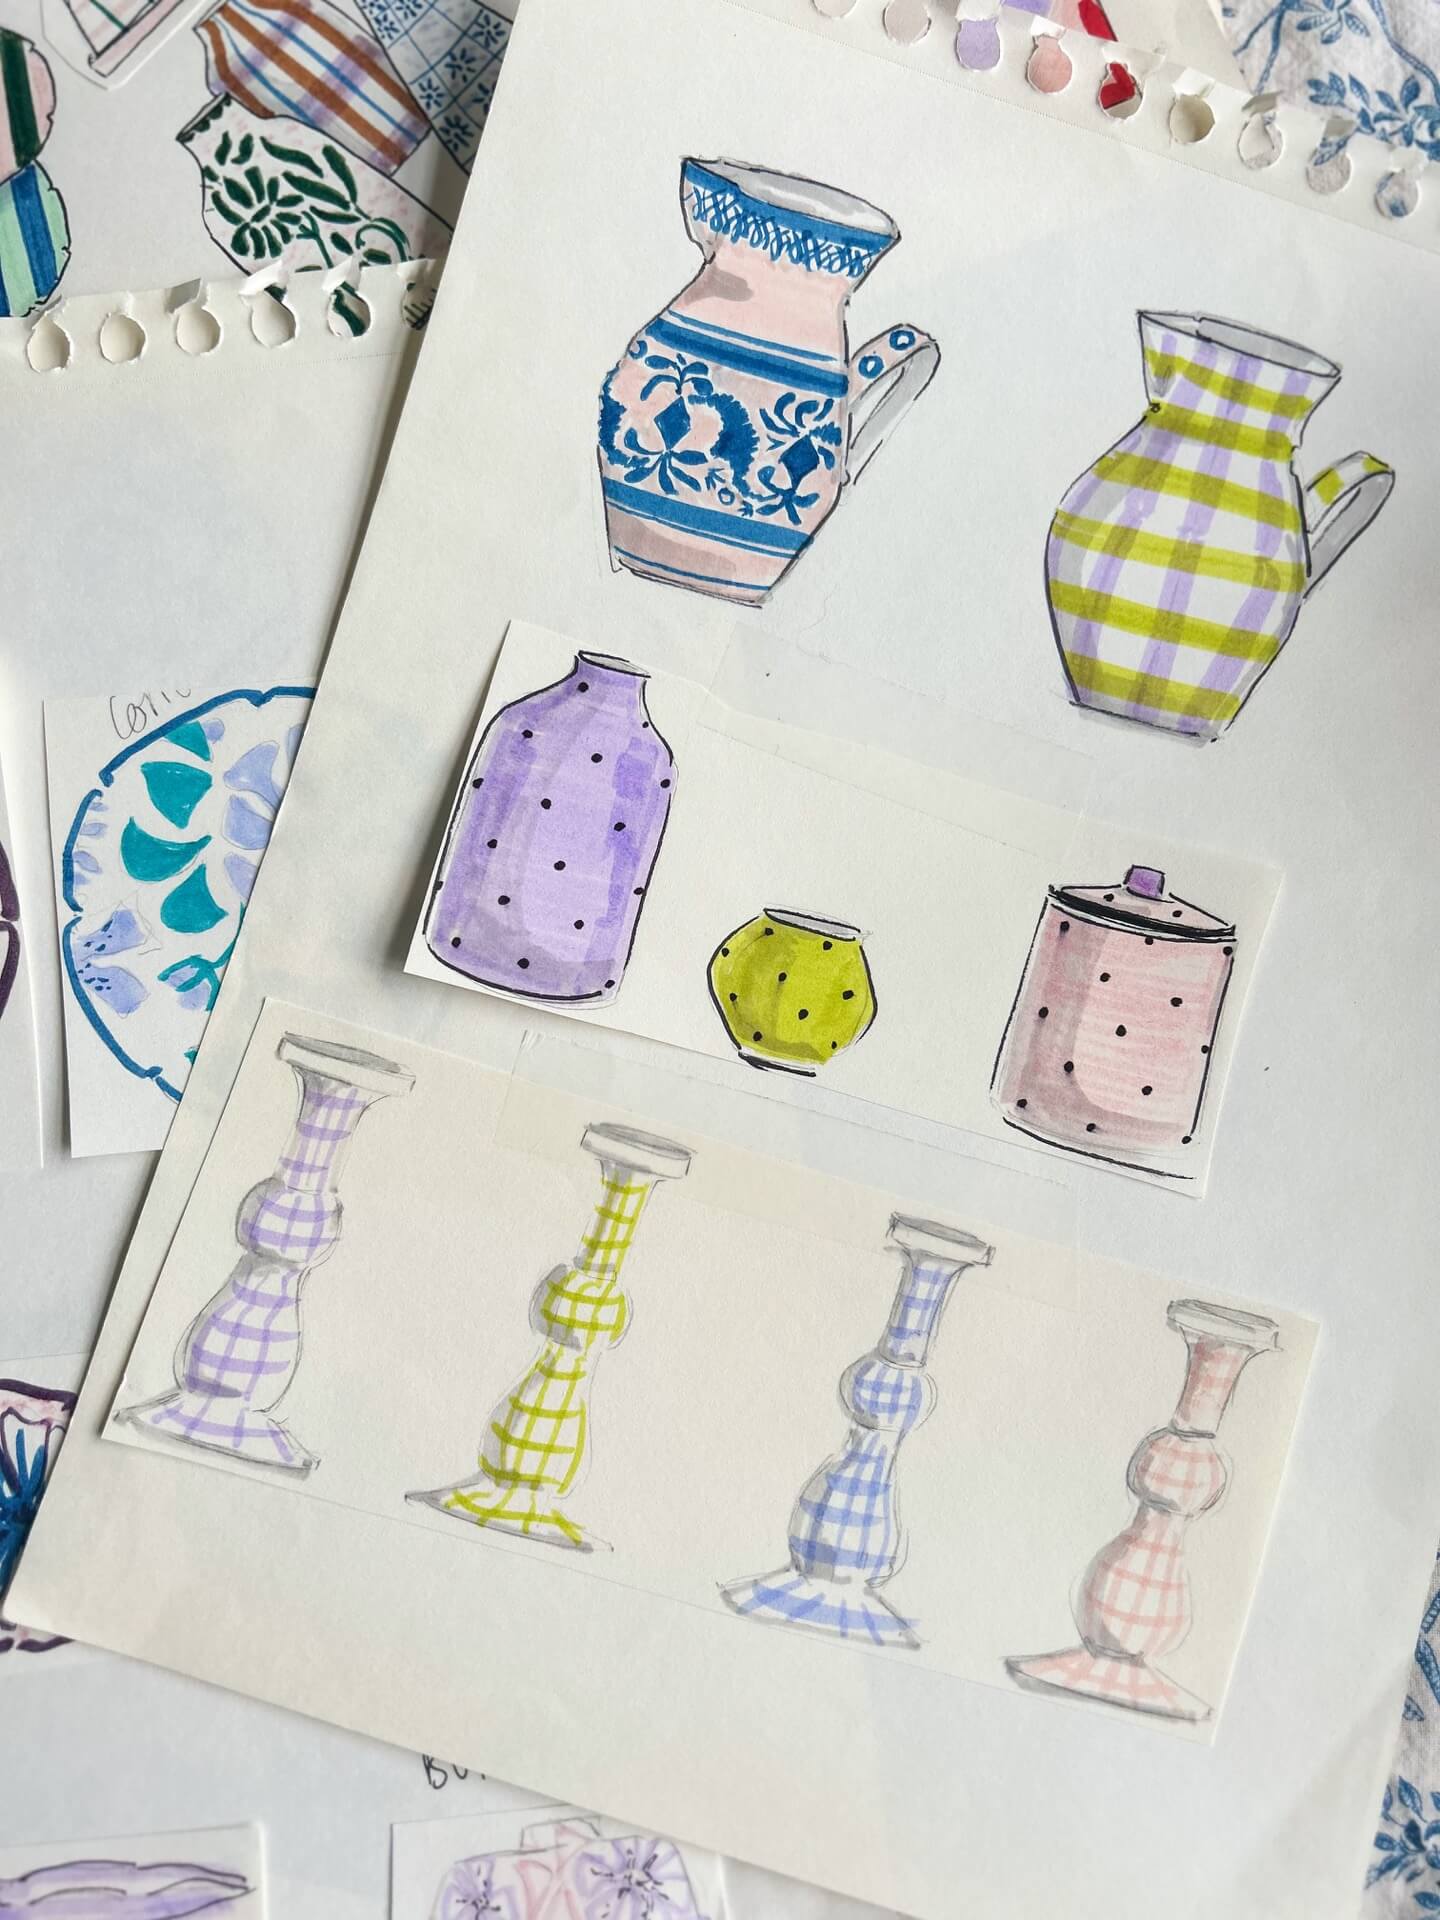 Colourful vintage antique style vase sketches from independent UK contemporary homeware brand Vaisselle